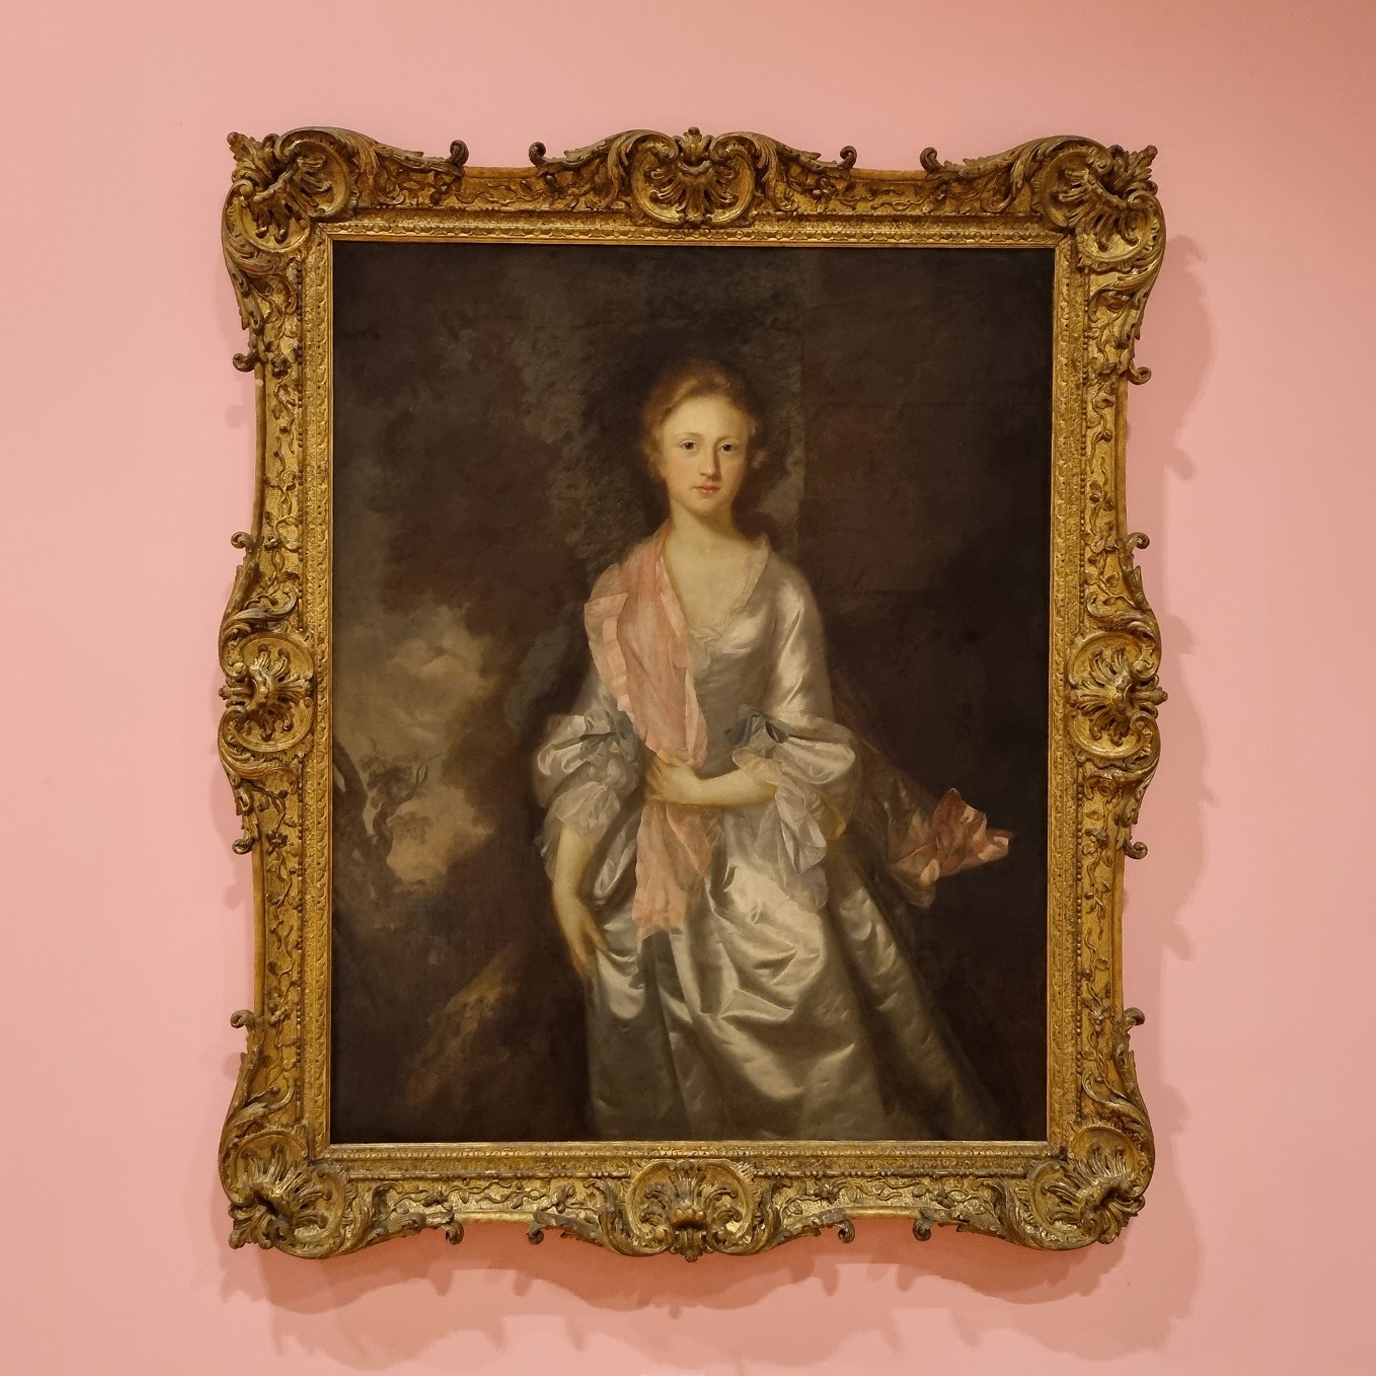 Portrait of Mrs Hamar on display in the 'Dress Code' exhibition